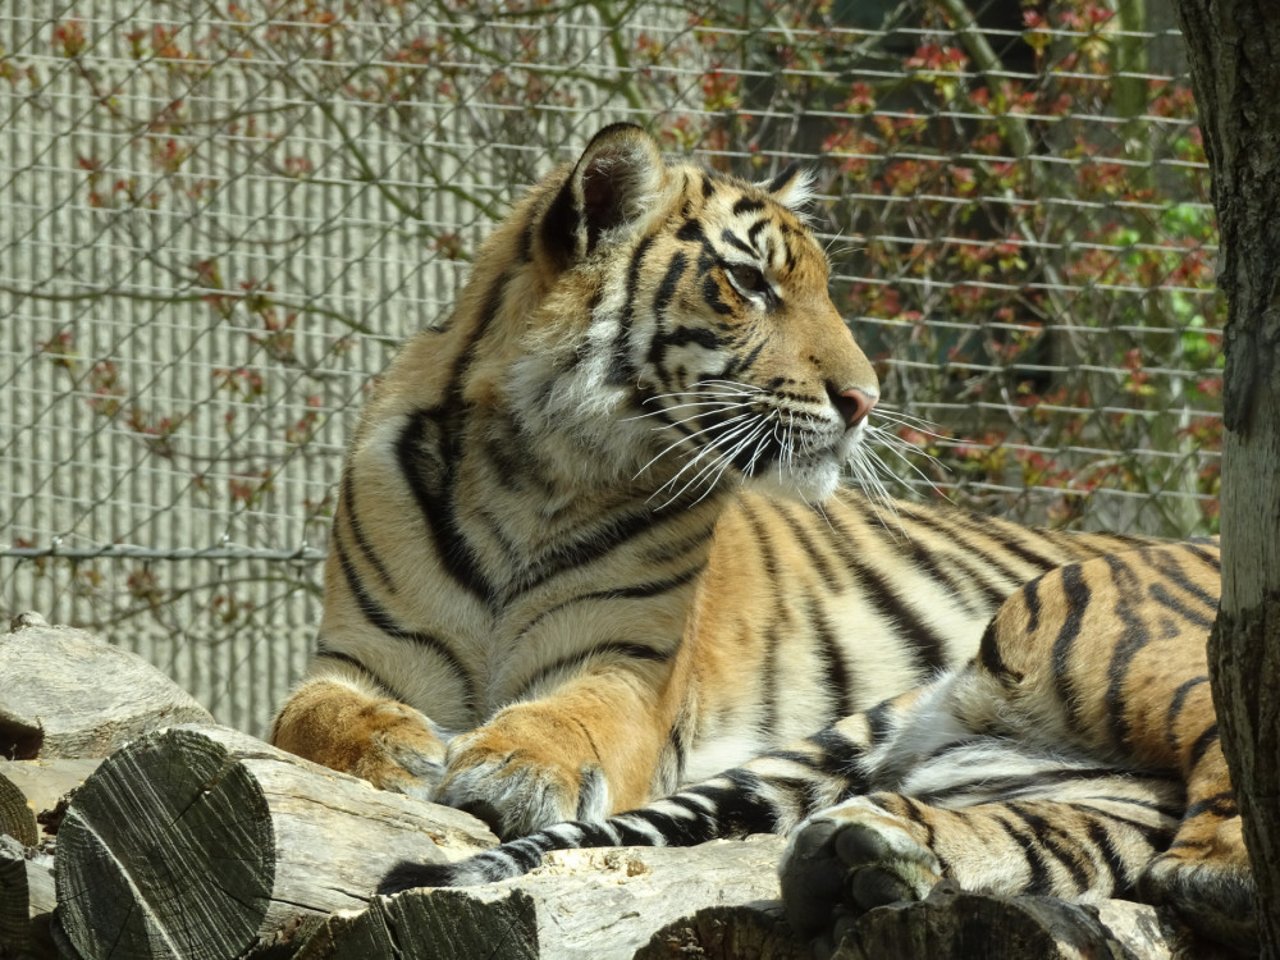 Sumatran Tiger in London Zoo, photograph by Shubhobroto Ghosh. In 2008, when Magdeburg Zoo in Germany killed three healthy hybrid tiger cubs and was penalised by a court for cruelty, the Zoological Society of London that runs London Zoo, supported the killing carried out by Magdeburg Zoo